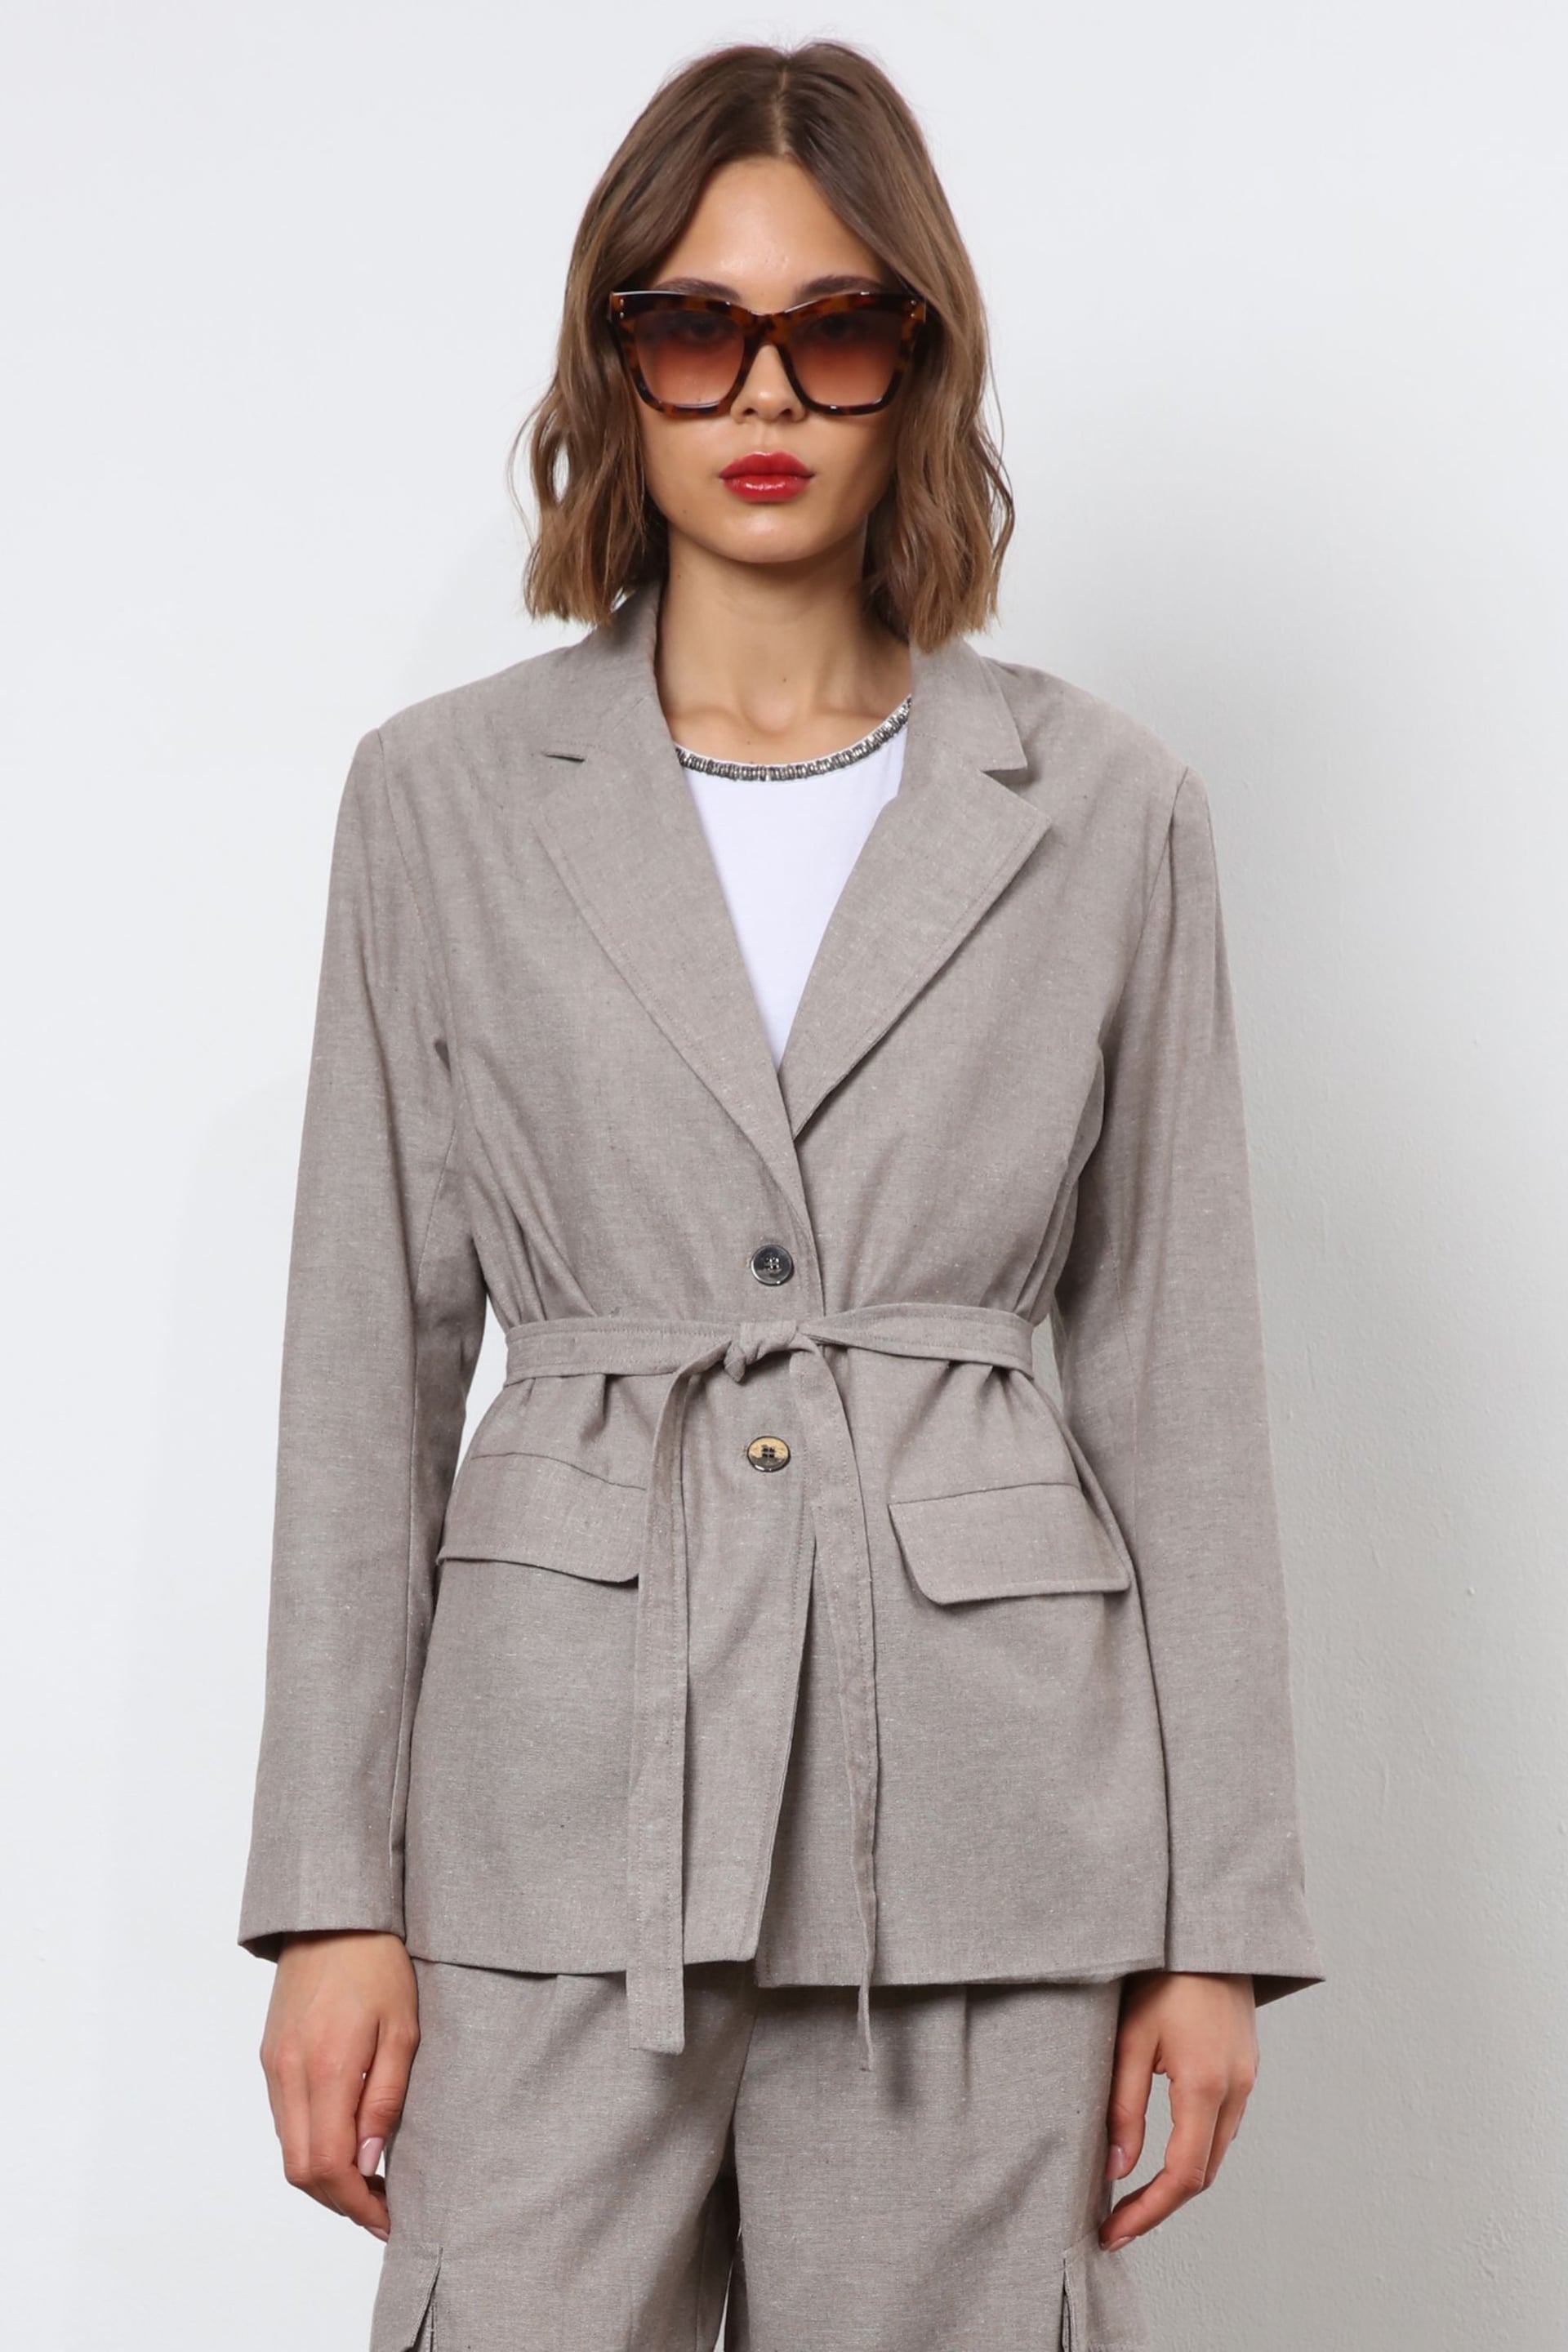 Religion Gray Belted Linen Mix Prime Blazer - Image 1 of 6